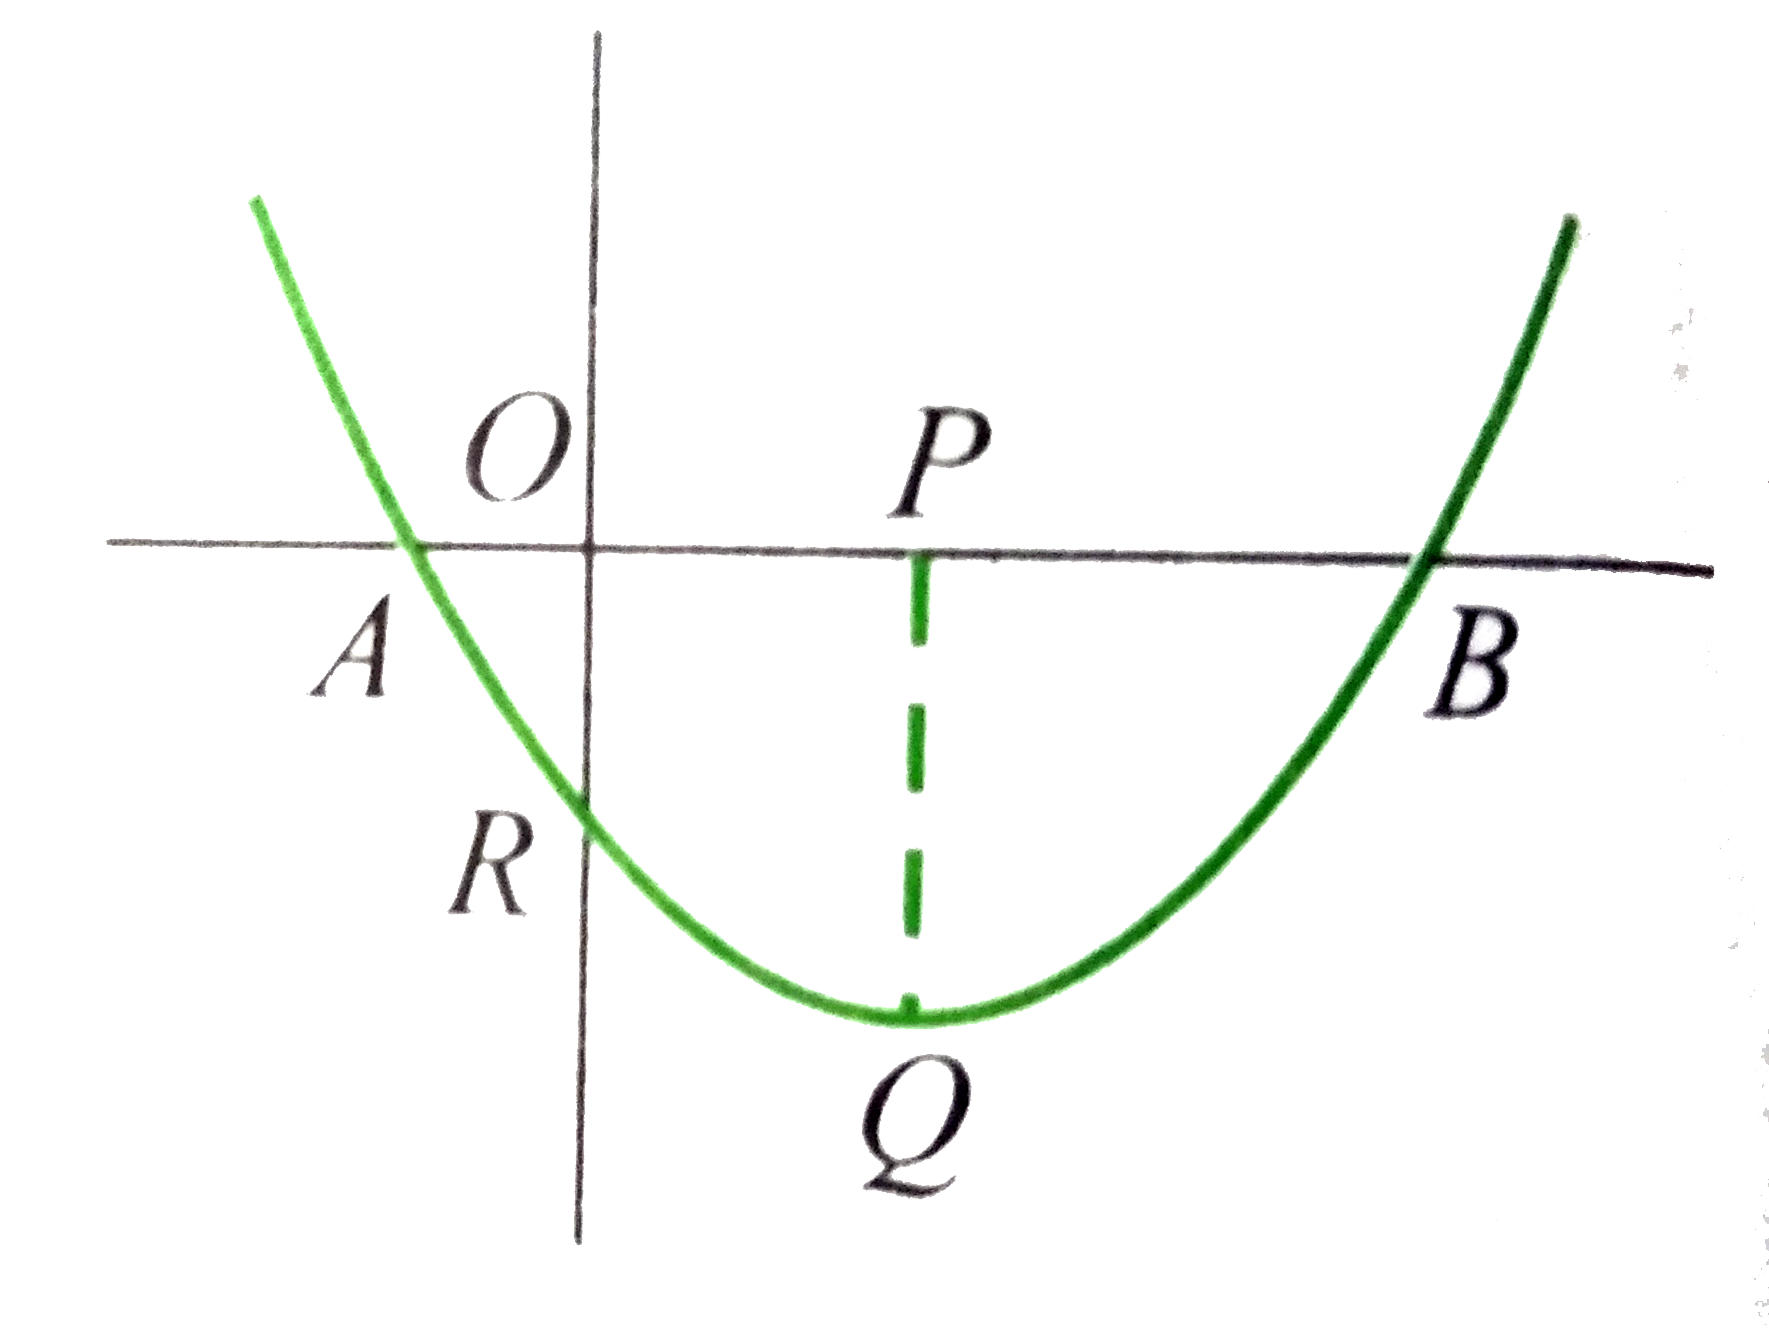 Graph of  y = ax^(2) + bx + c  is as shown in the figure . If  PQ= 9,   OR = 5  and OB = 2.5, the which  of the following is /are ture?